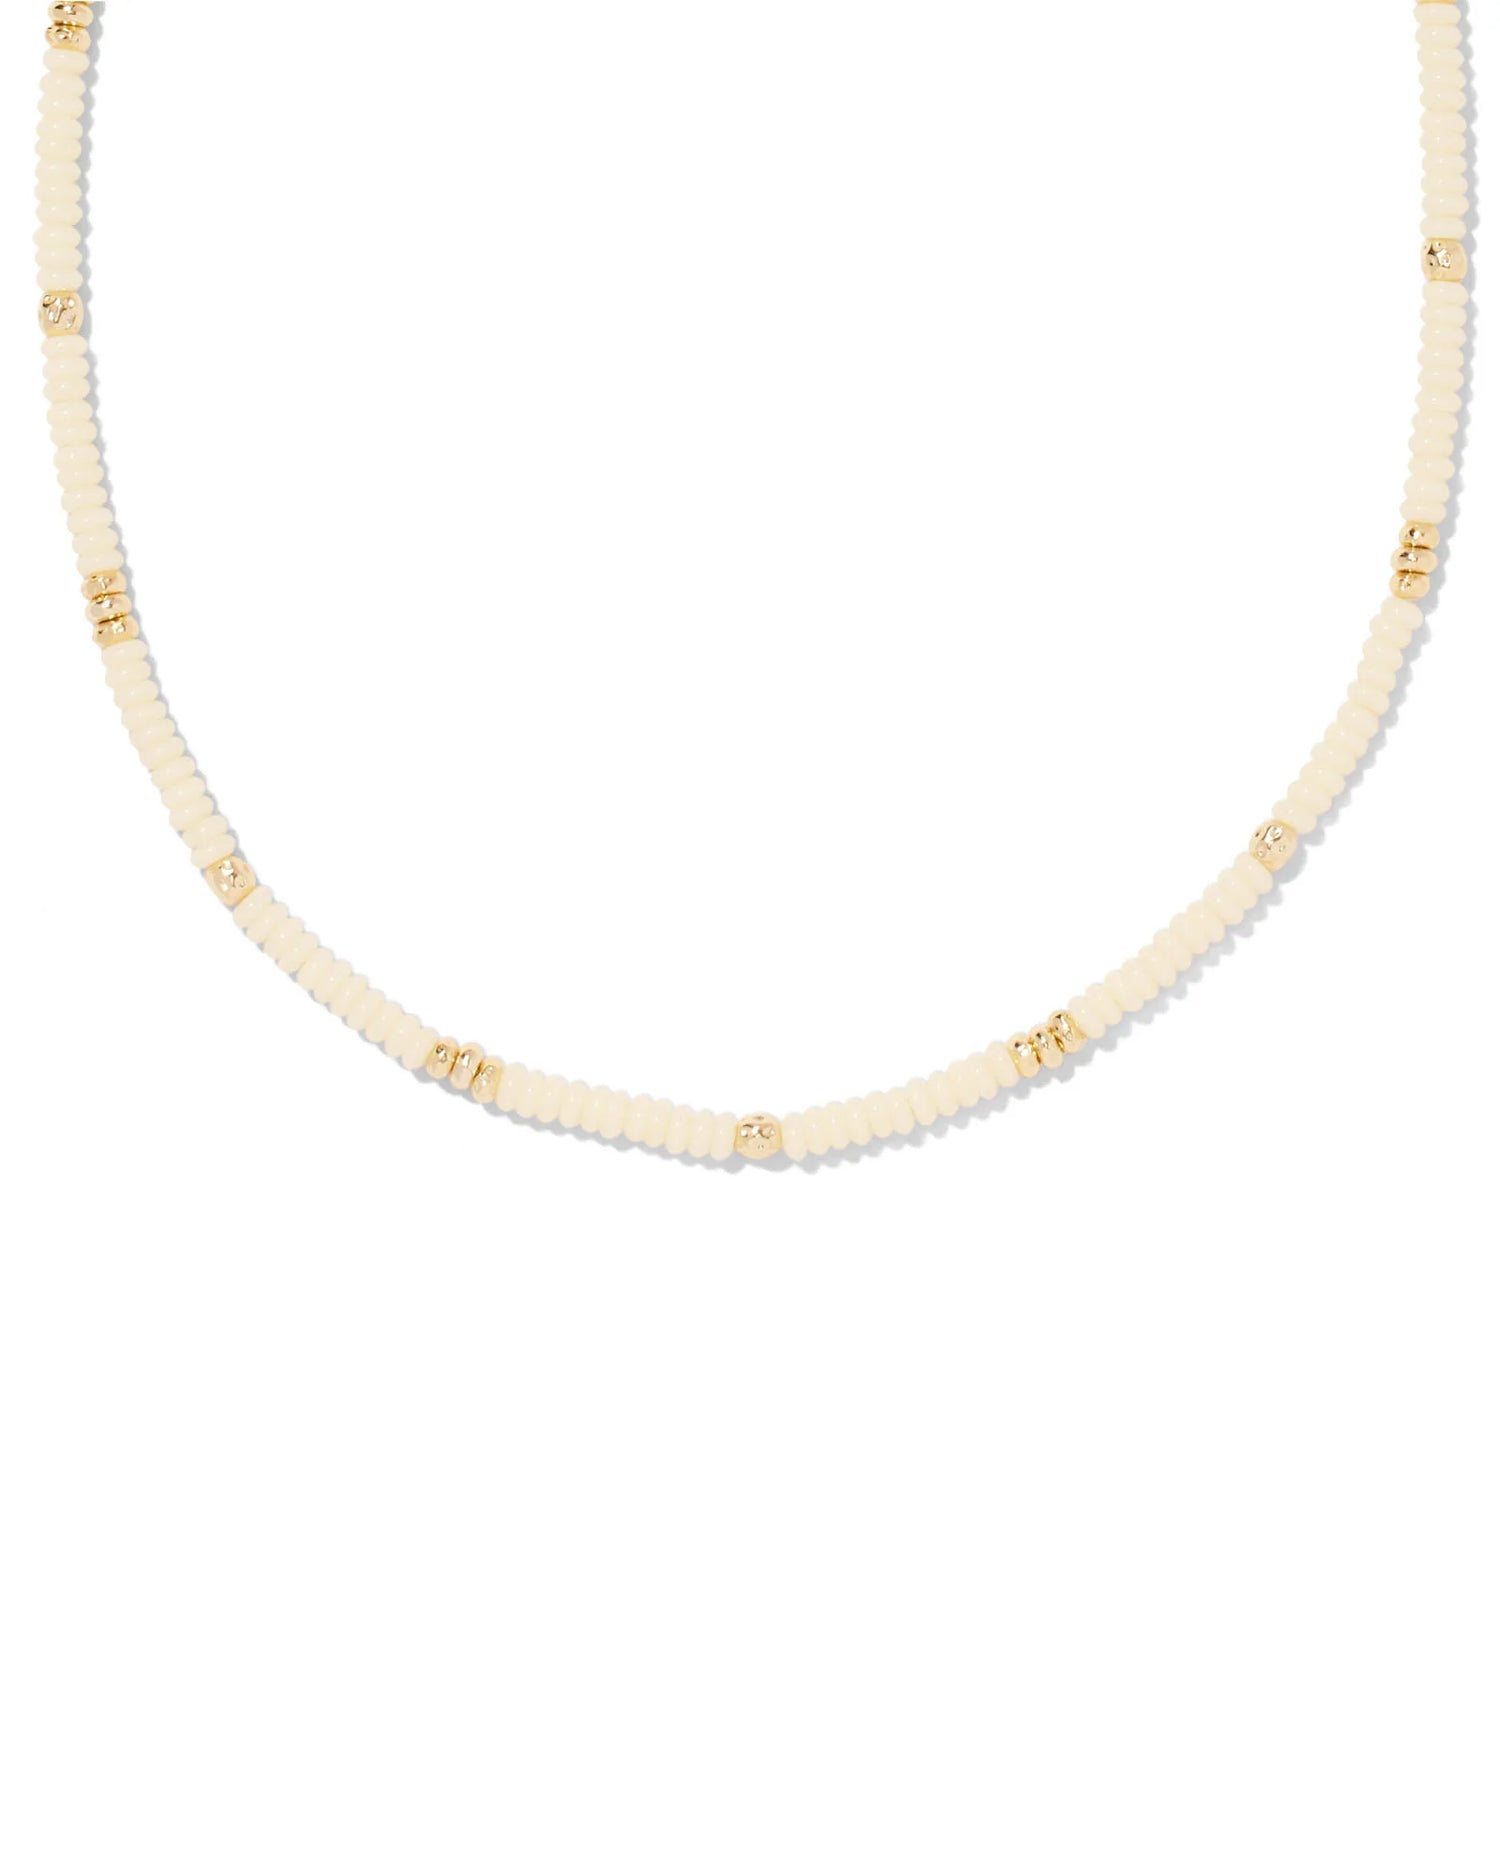 white mother of pearl beaded strand necklace with small detail of gold beads mixed in